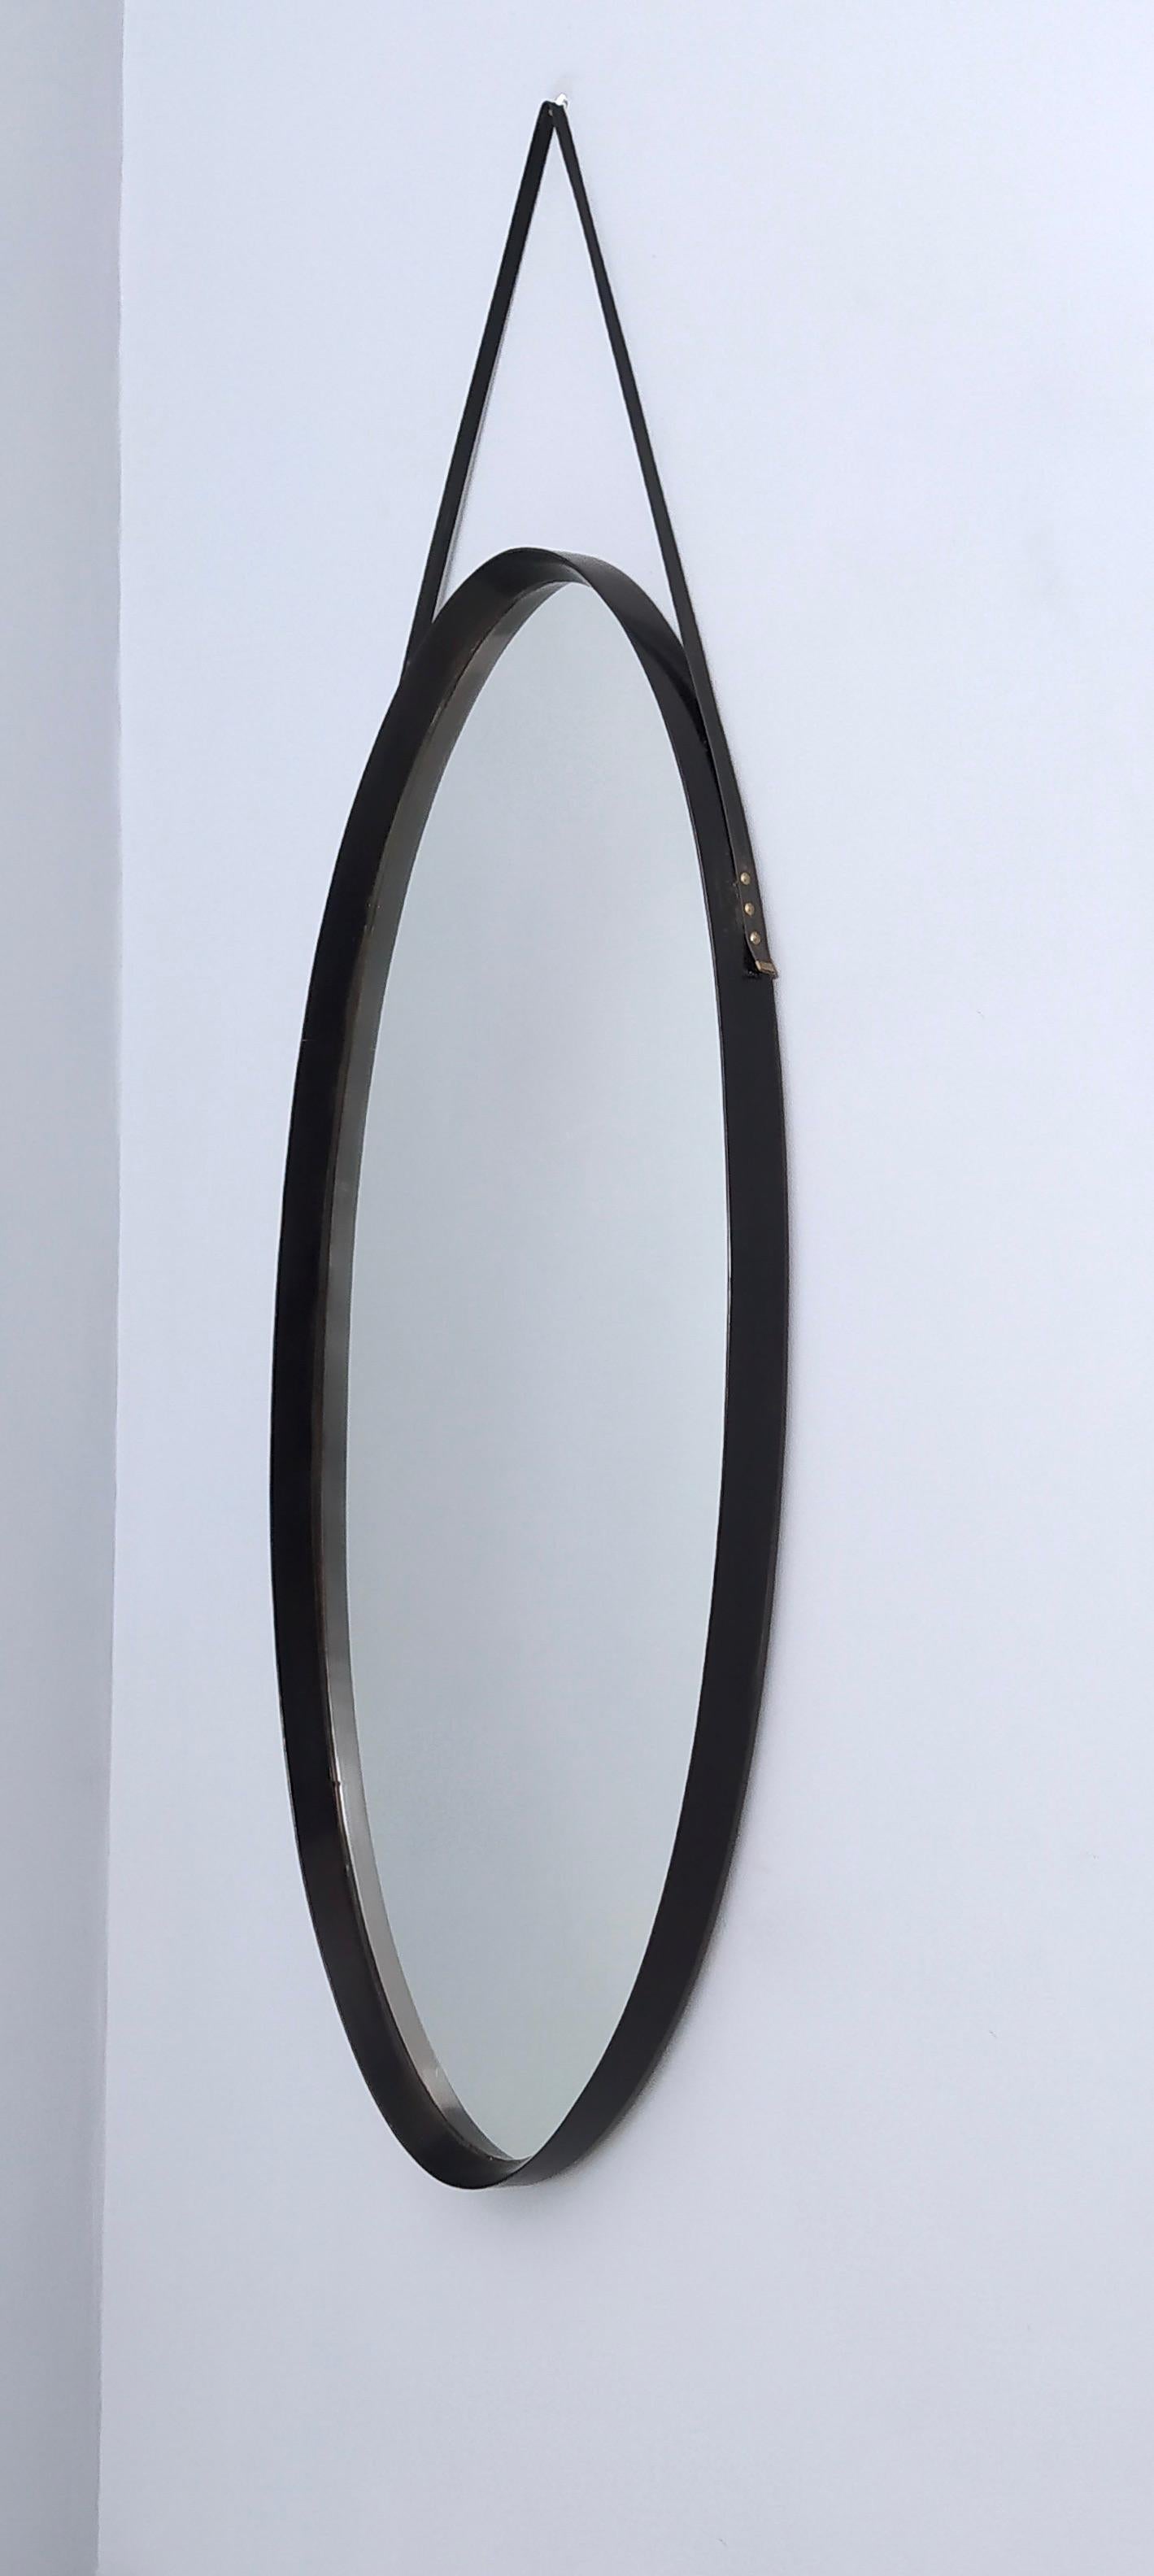 Oval Vintage Wall Mirror with Ebonized Wood Frame and a Leather Hook, Italy In Good Condition For Sale In Bresso, Lombardy